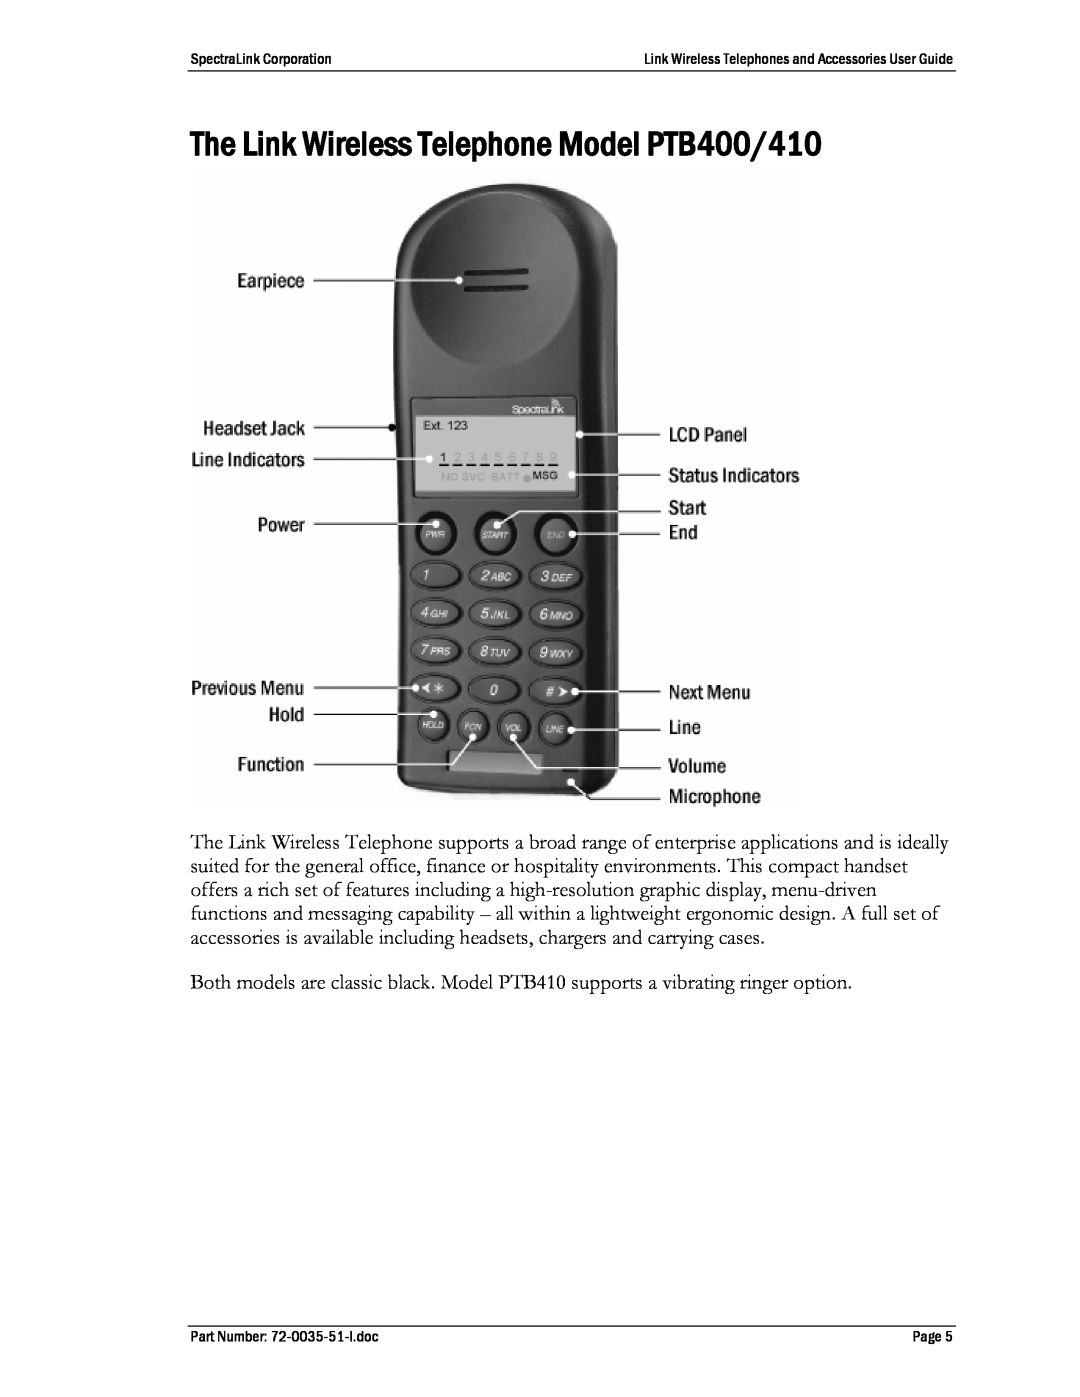 SpectraLink manual The Link Wireless Telephone Model PTB400/410, SpectraLink Corporation, Part Number 72-0035-51-I.doc 